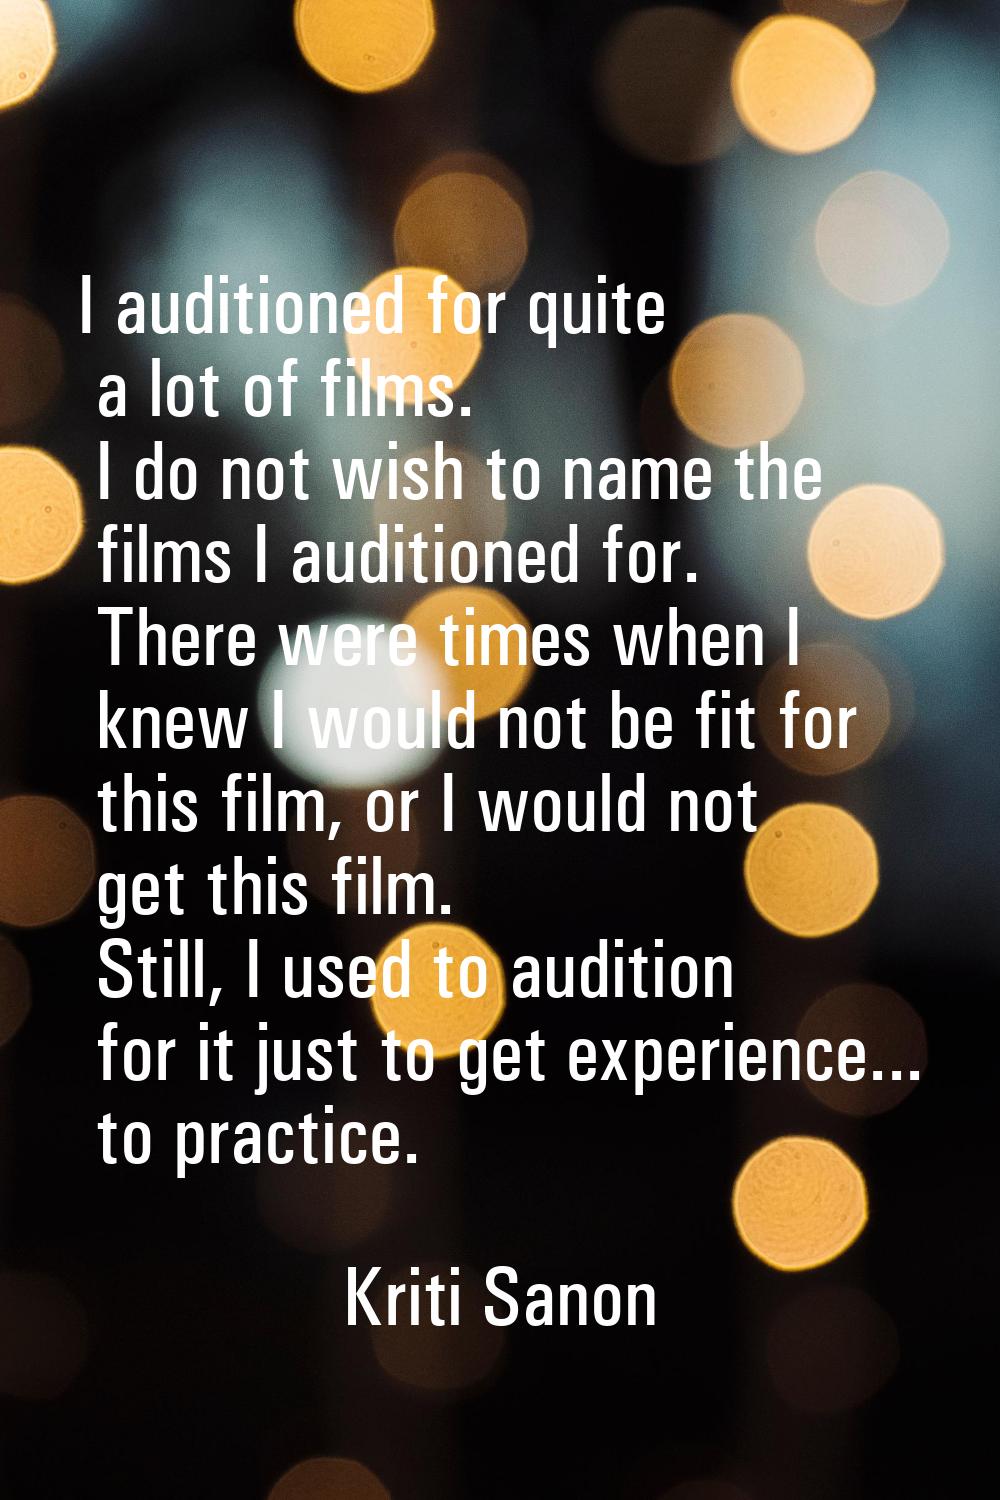 I auditioned for quite a lot of films. I do not wish to name the films I auditioned for. There were